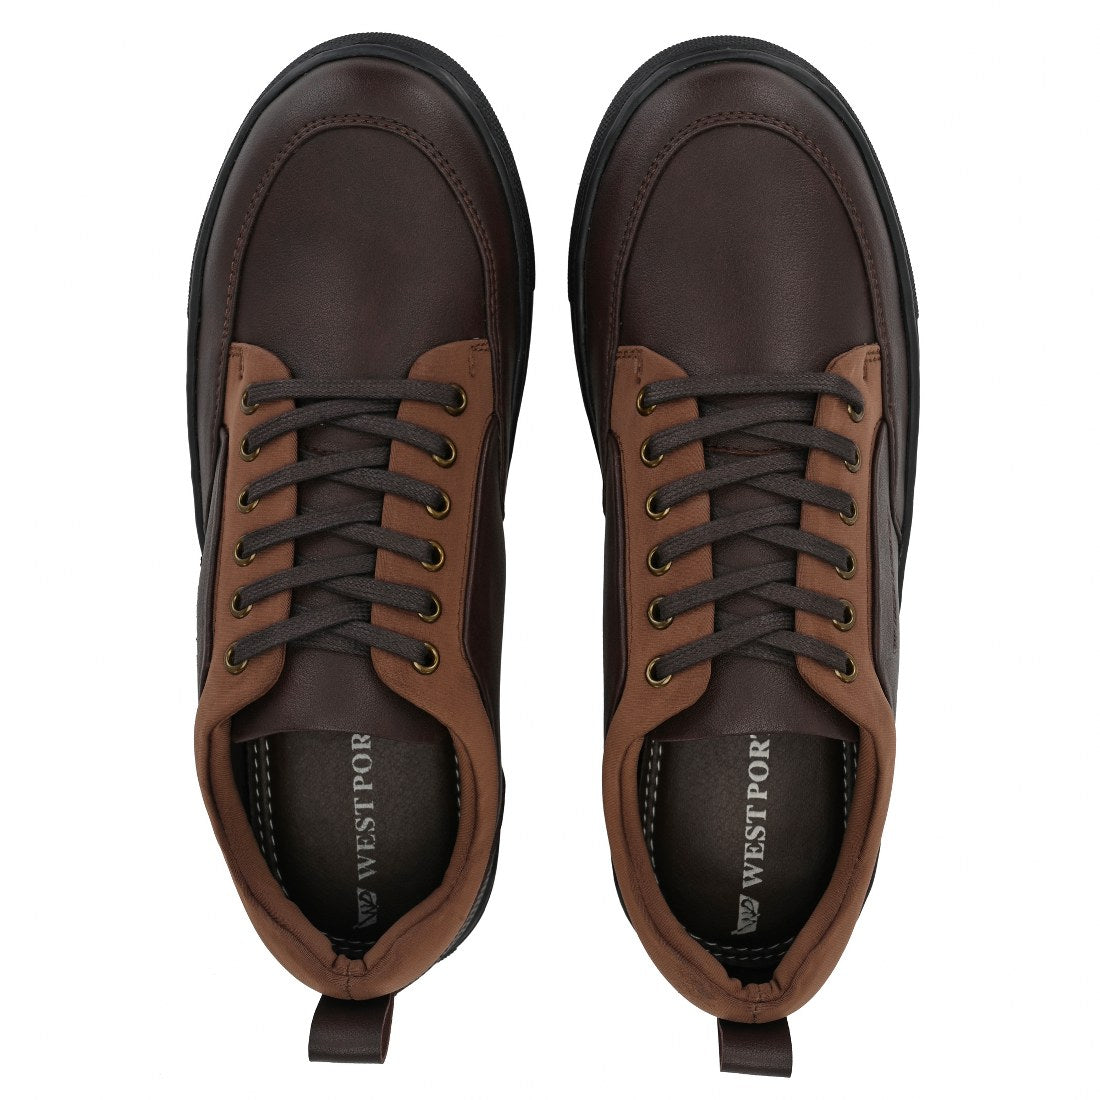 FUN-53 MEN NON-LEATHER BROWN CASUAL LACE UP SNEAKERS